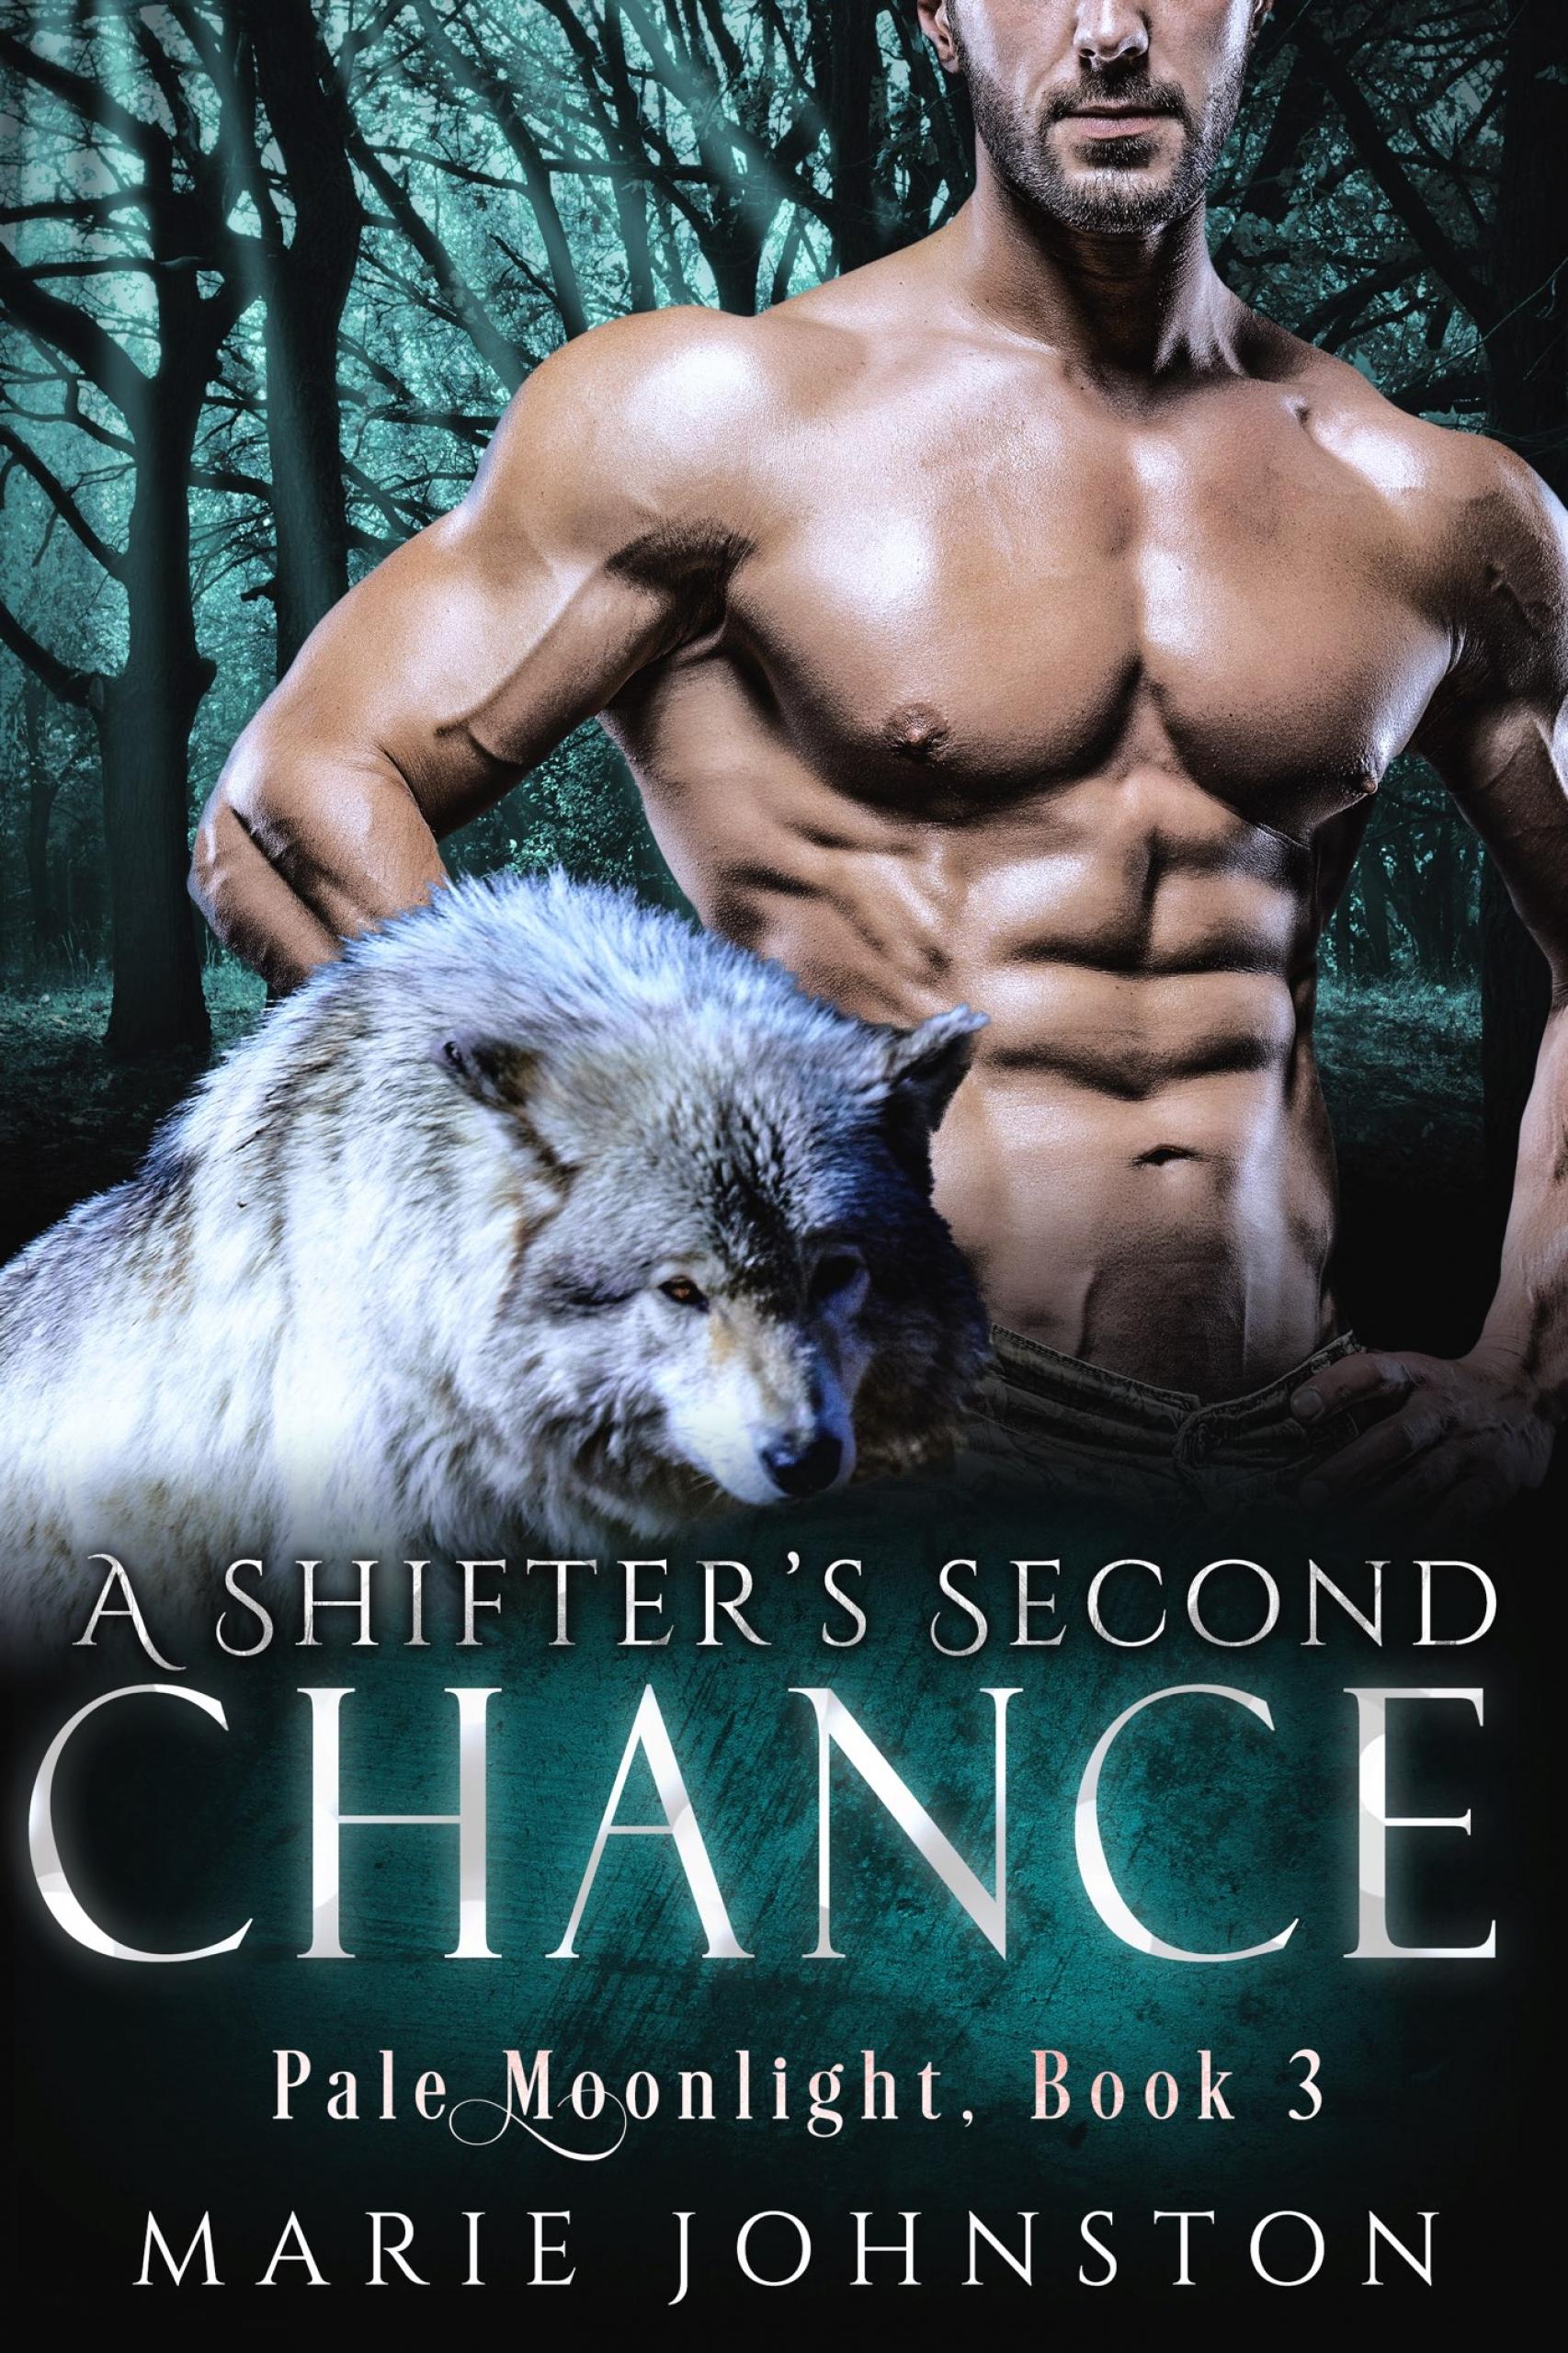 A Shifter"s Second Chance